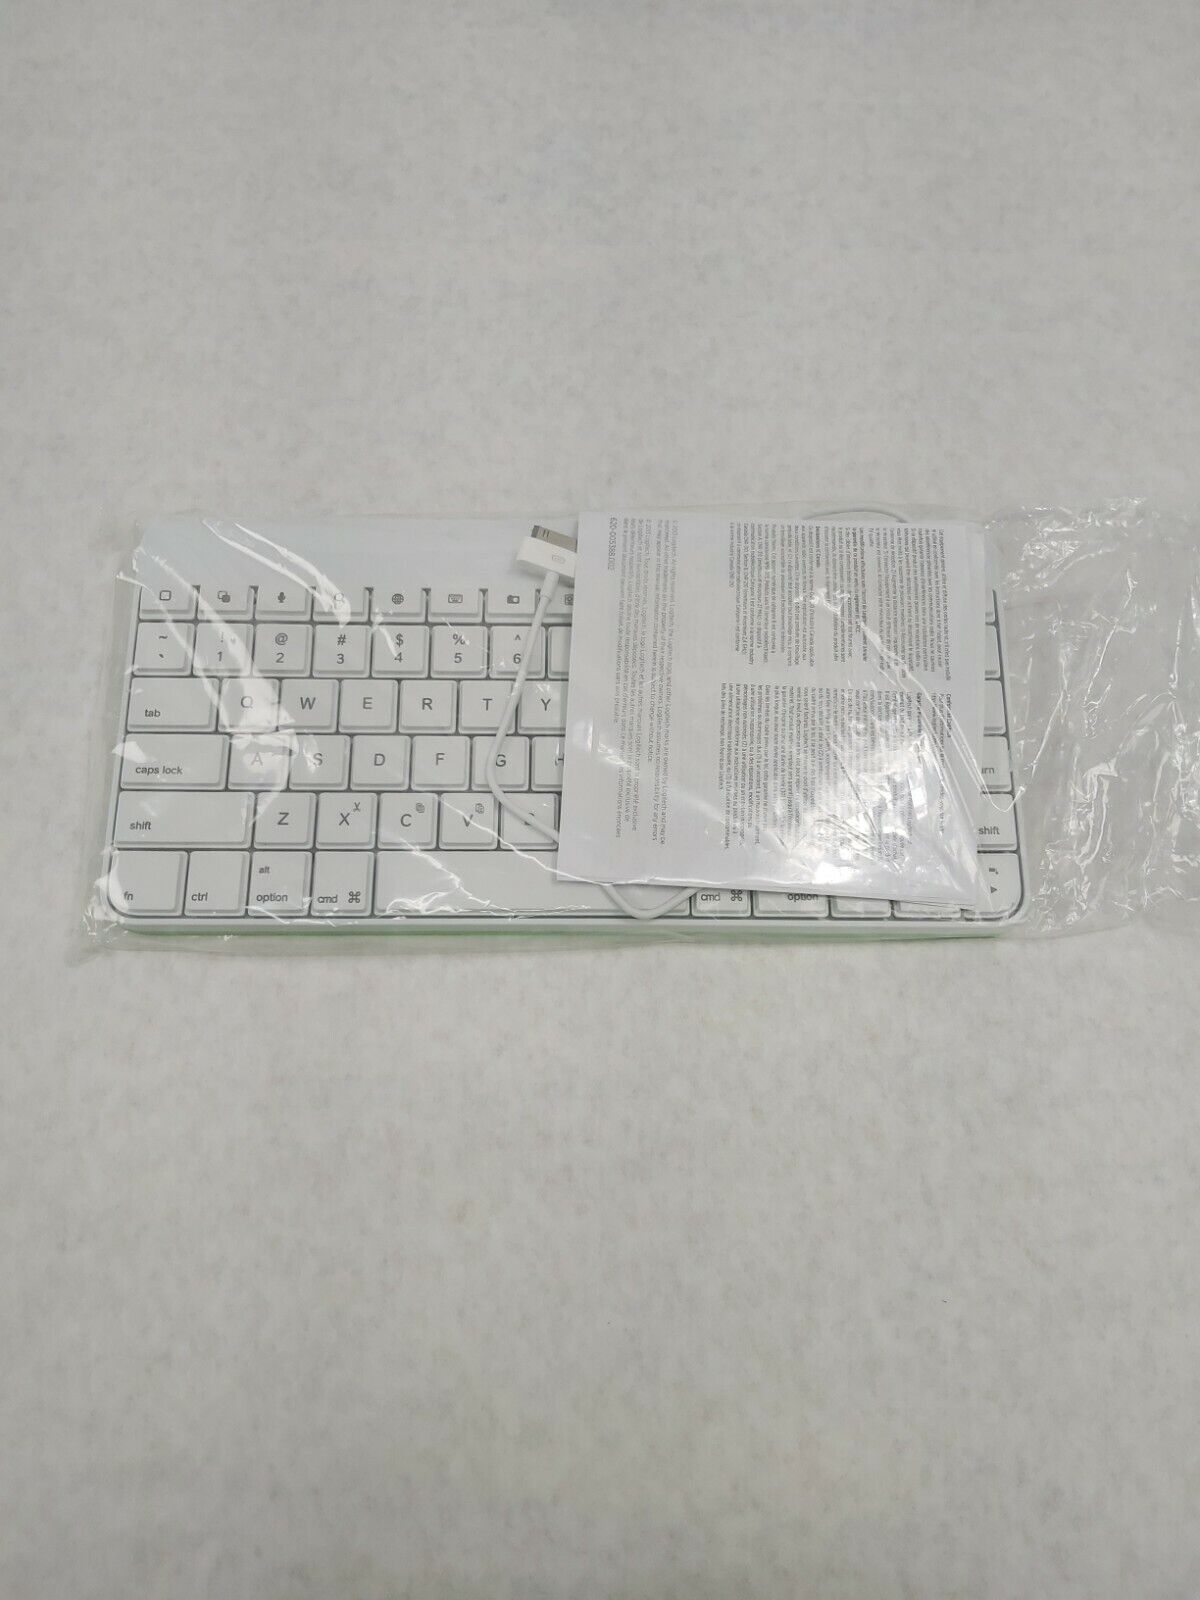 Logitech Wired Keyboard for iPad, 30-Pin Connector Lot of 2